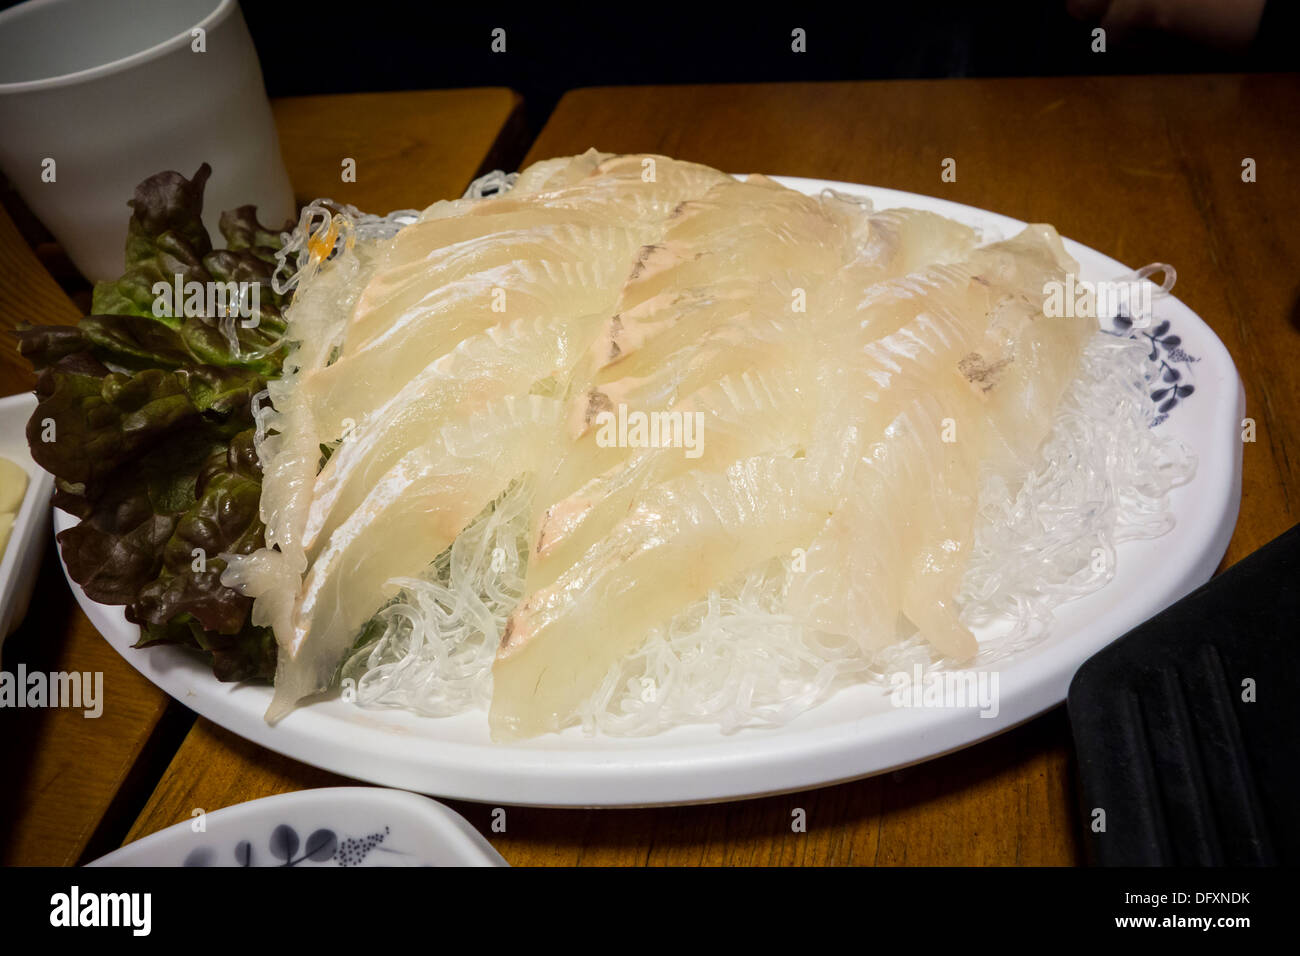 Sliced raw fish on a plate Stock Photo